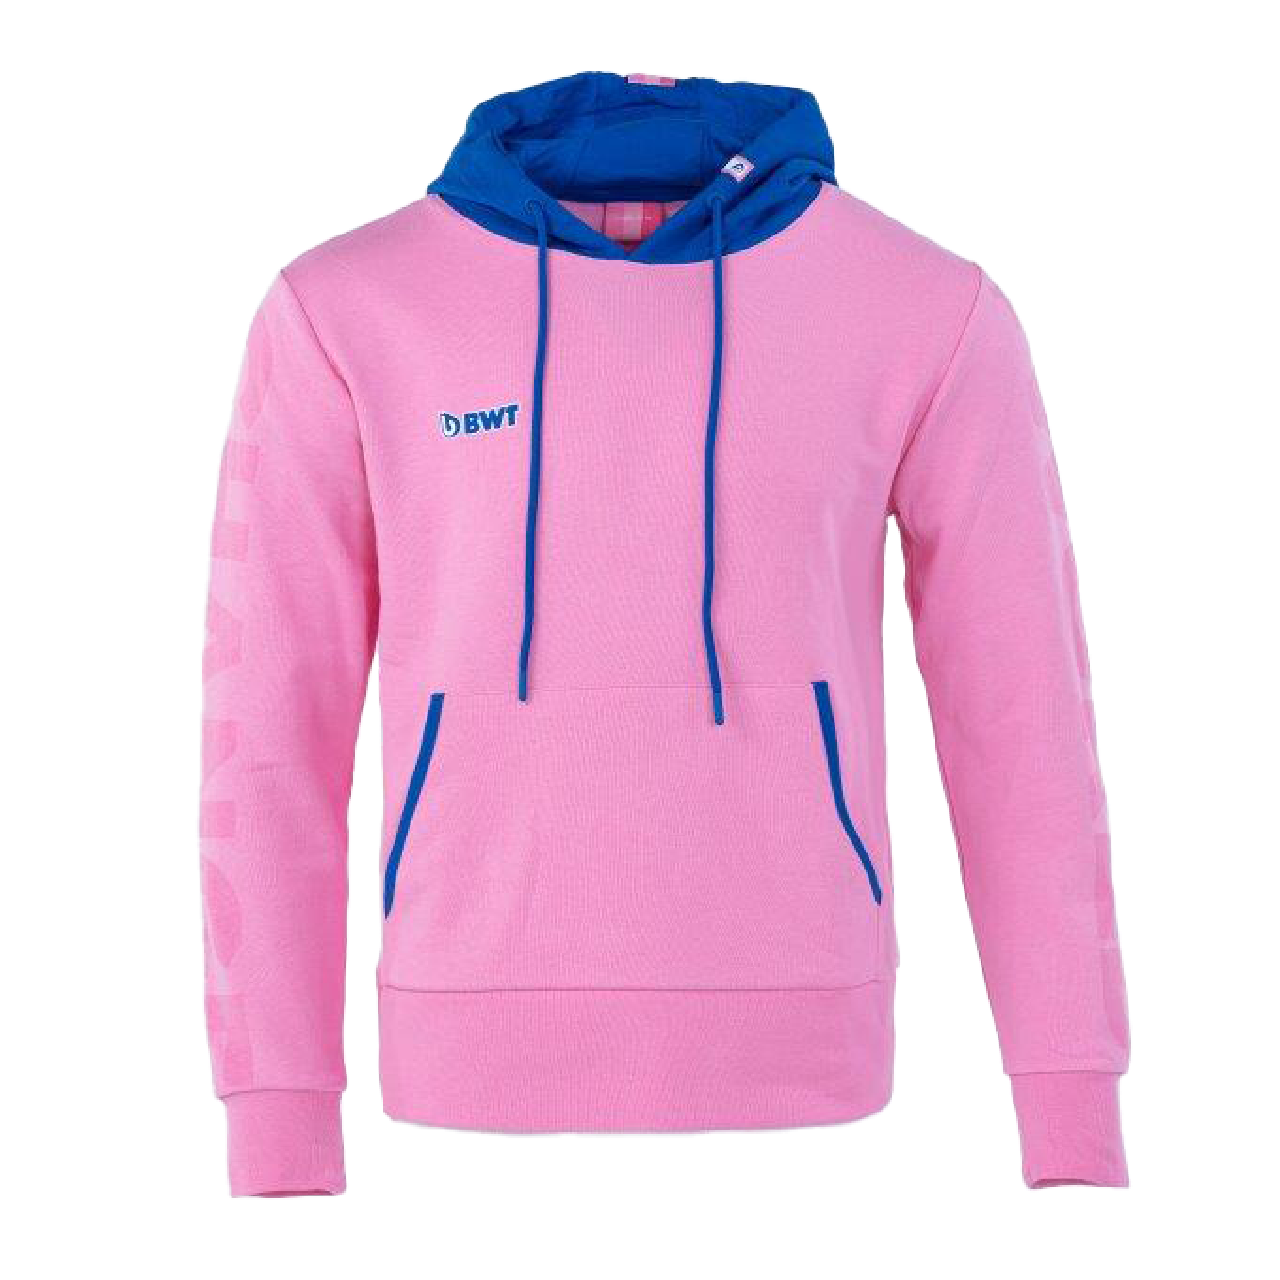 BWT Change the World Hoodie Ladies in pink with blue CWT logo